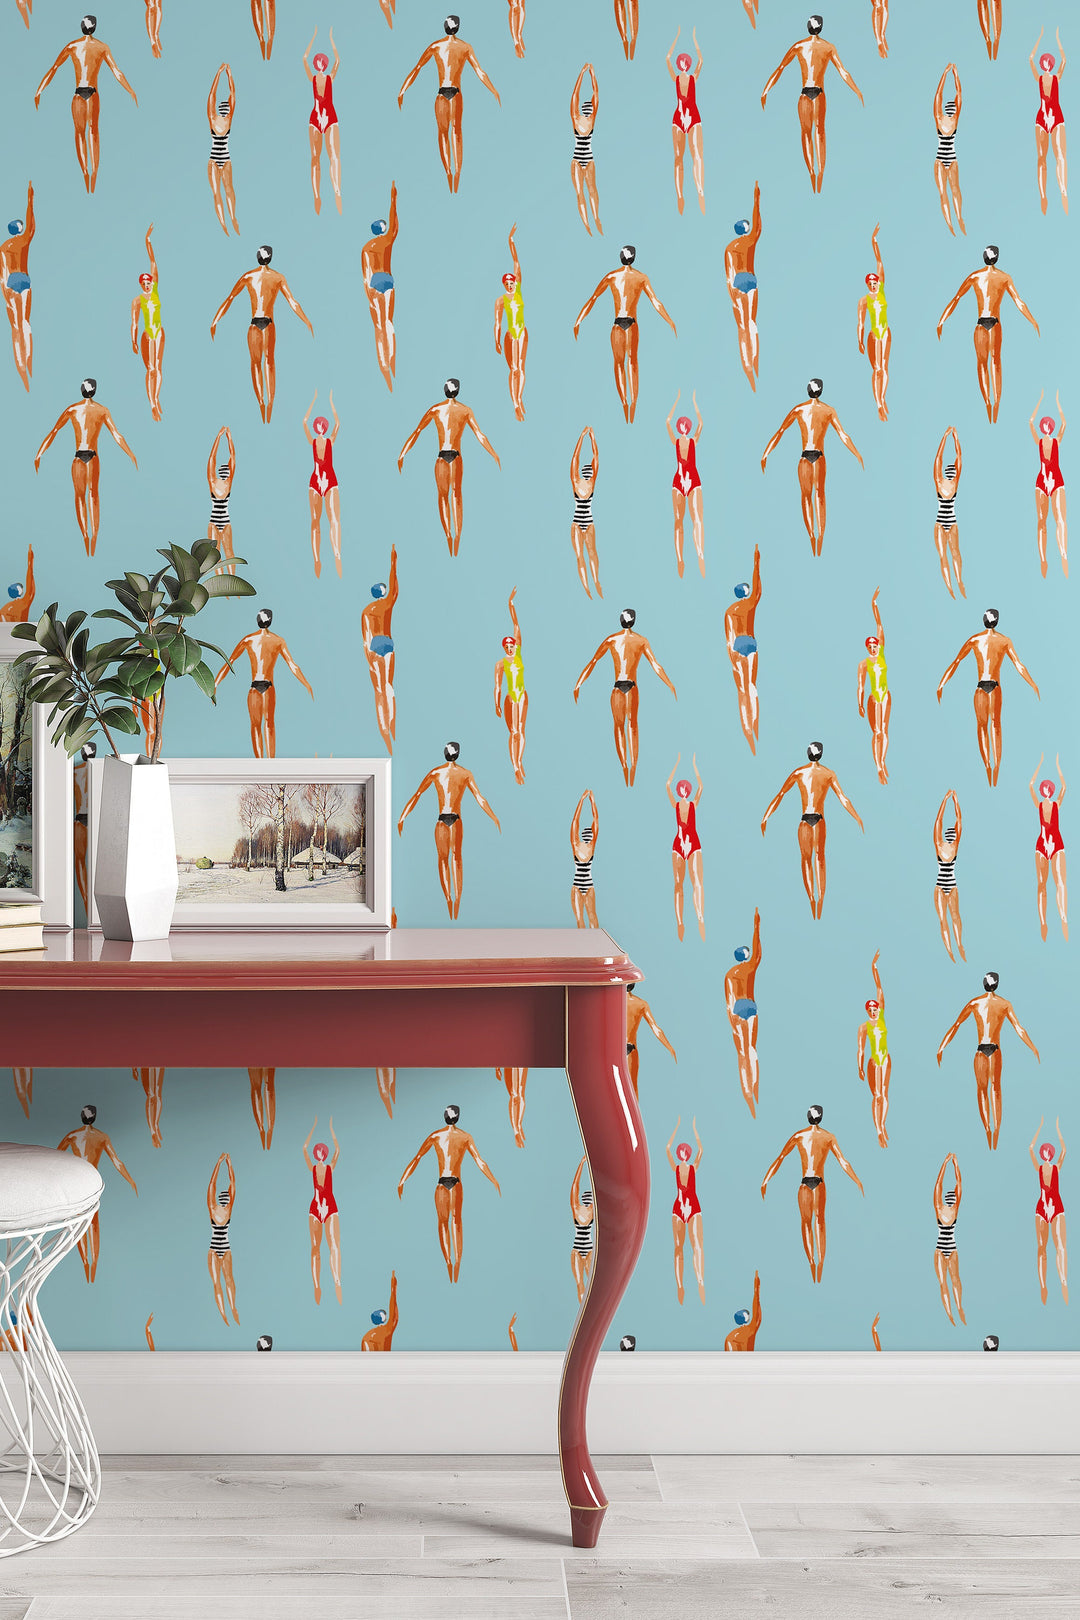 Vintage Swimmers Wallpaper - Peel & Stick, Removable, Self Adhesive